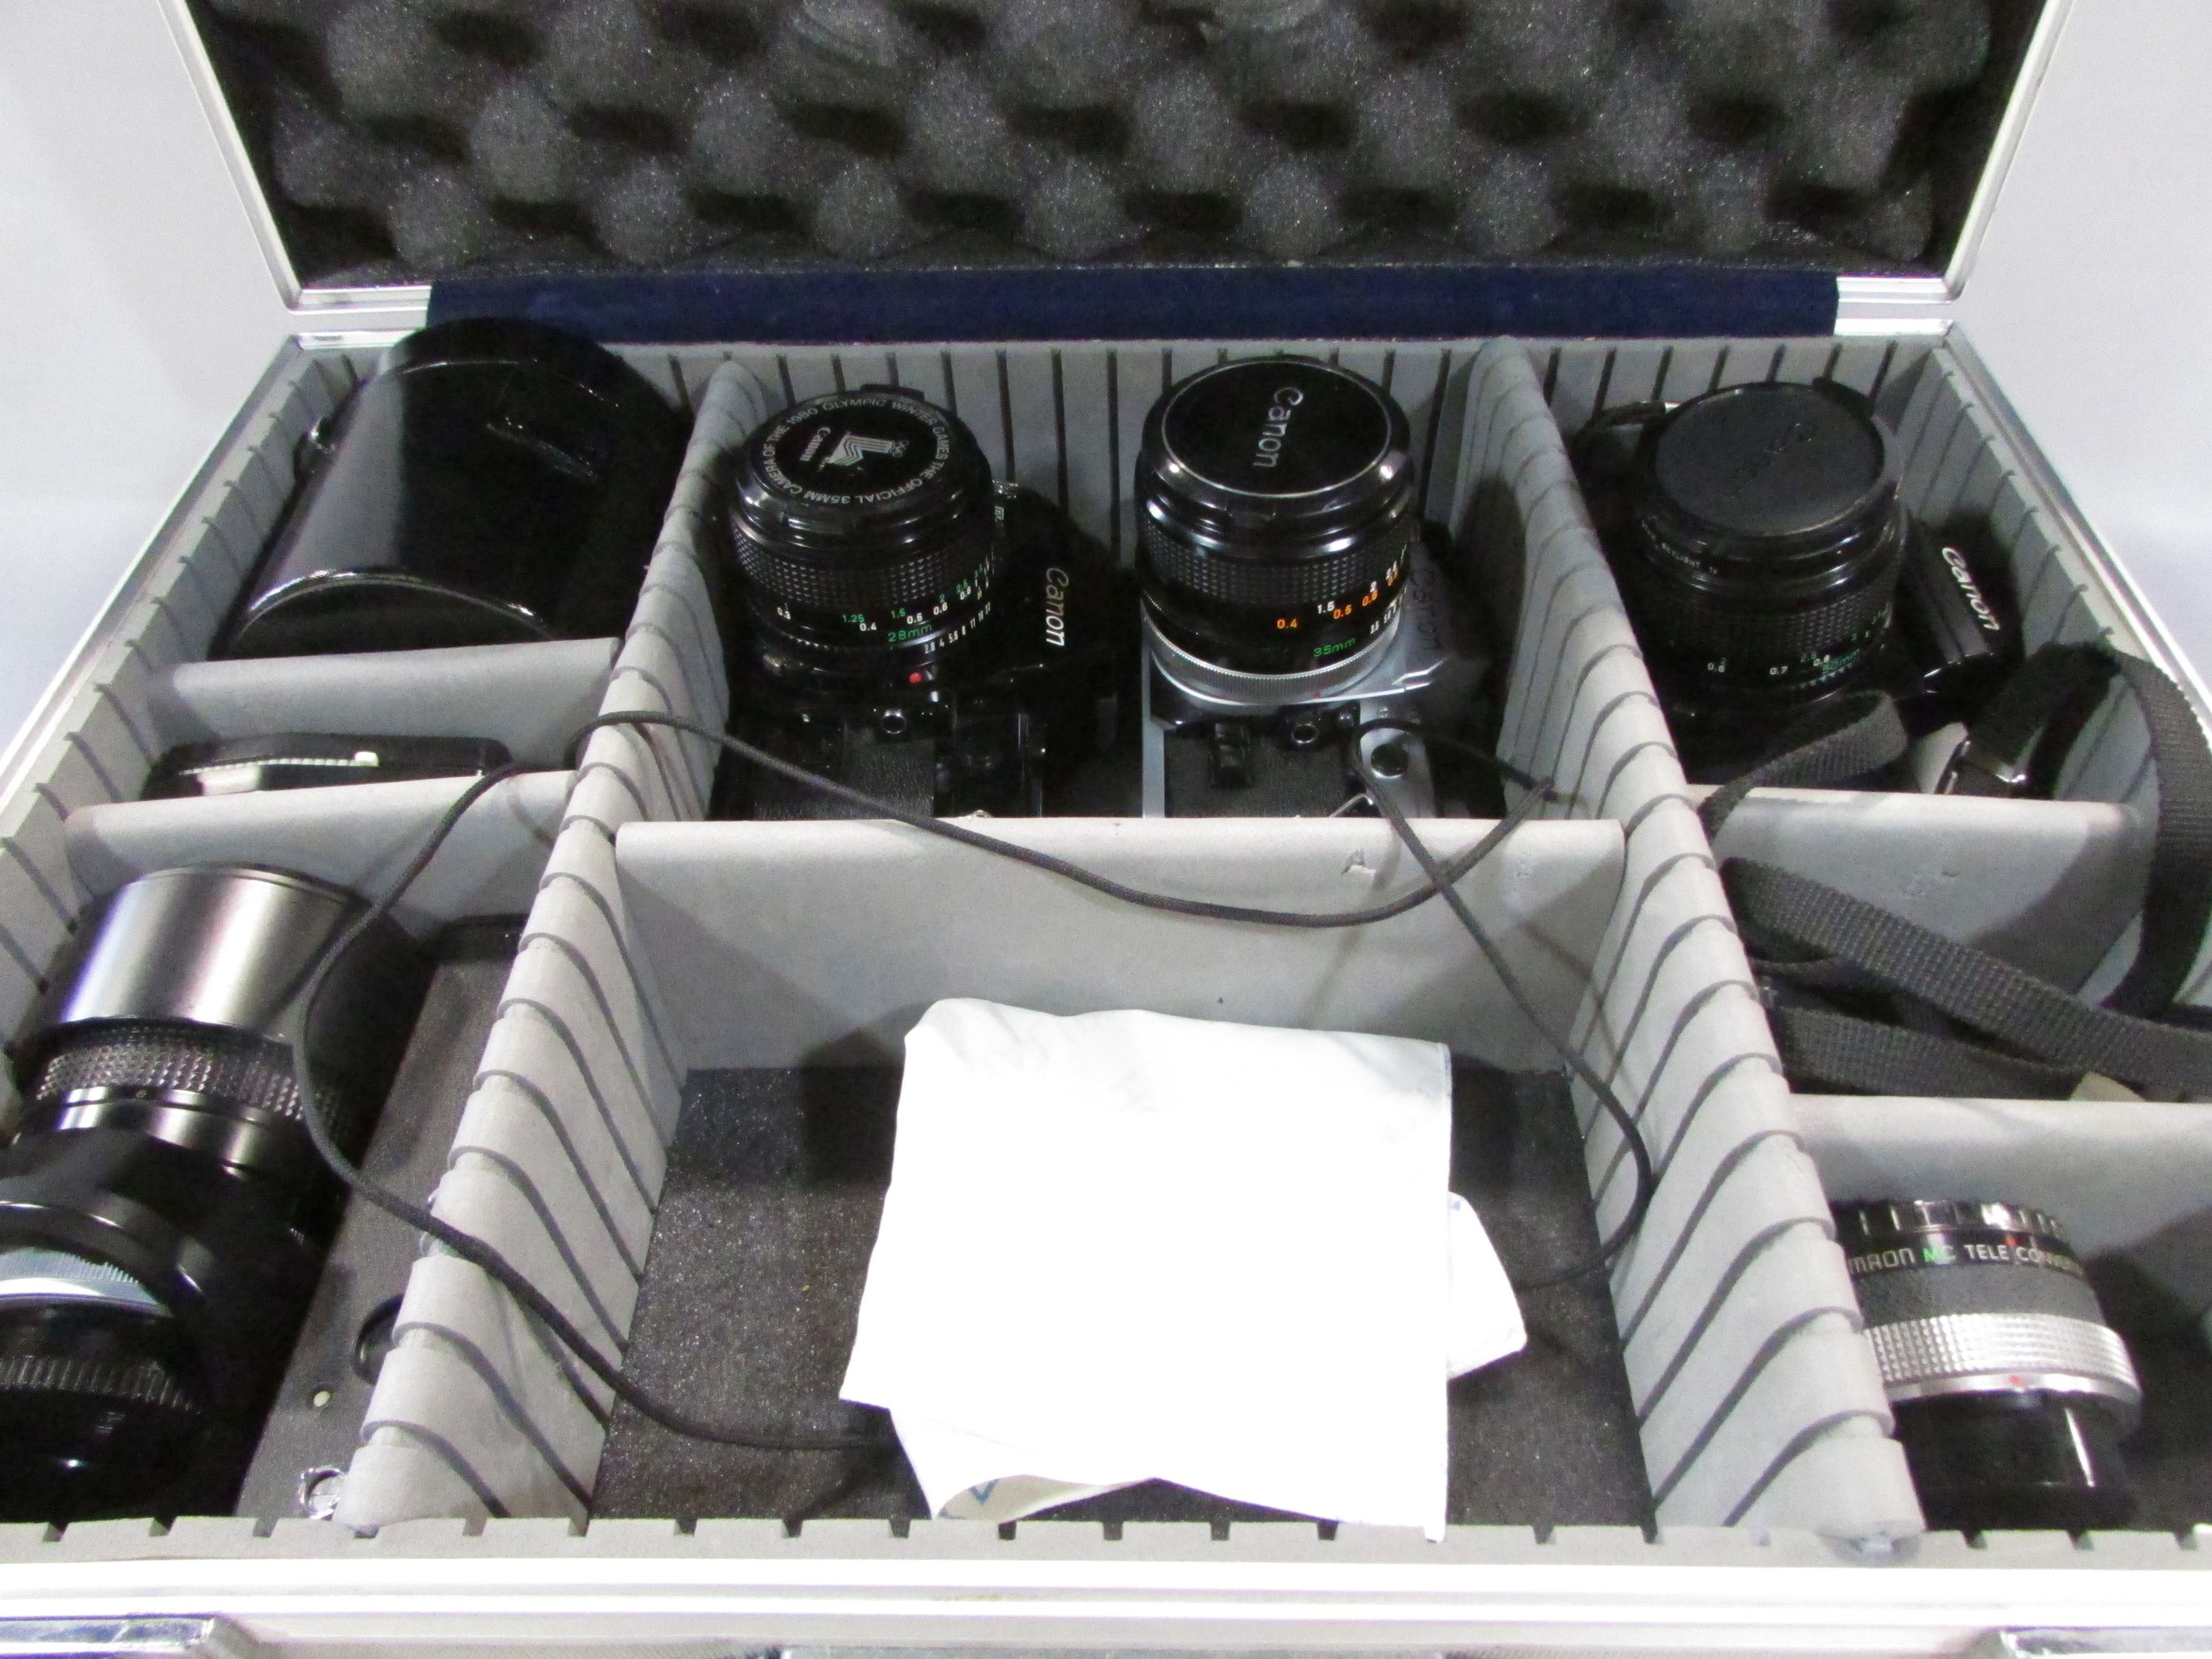 Three Canon cameras: models A1, AE1, F1, together with a 135 millimetre lens, 20 mm lens, all - Image 2 of 5